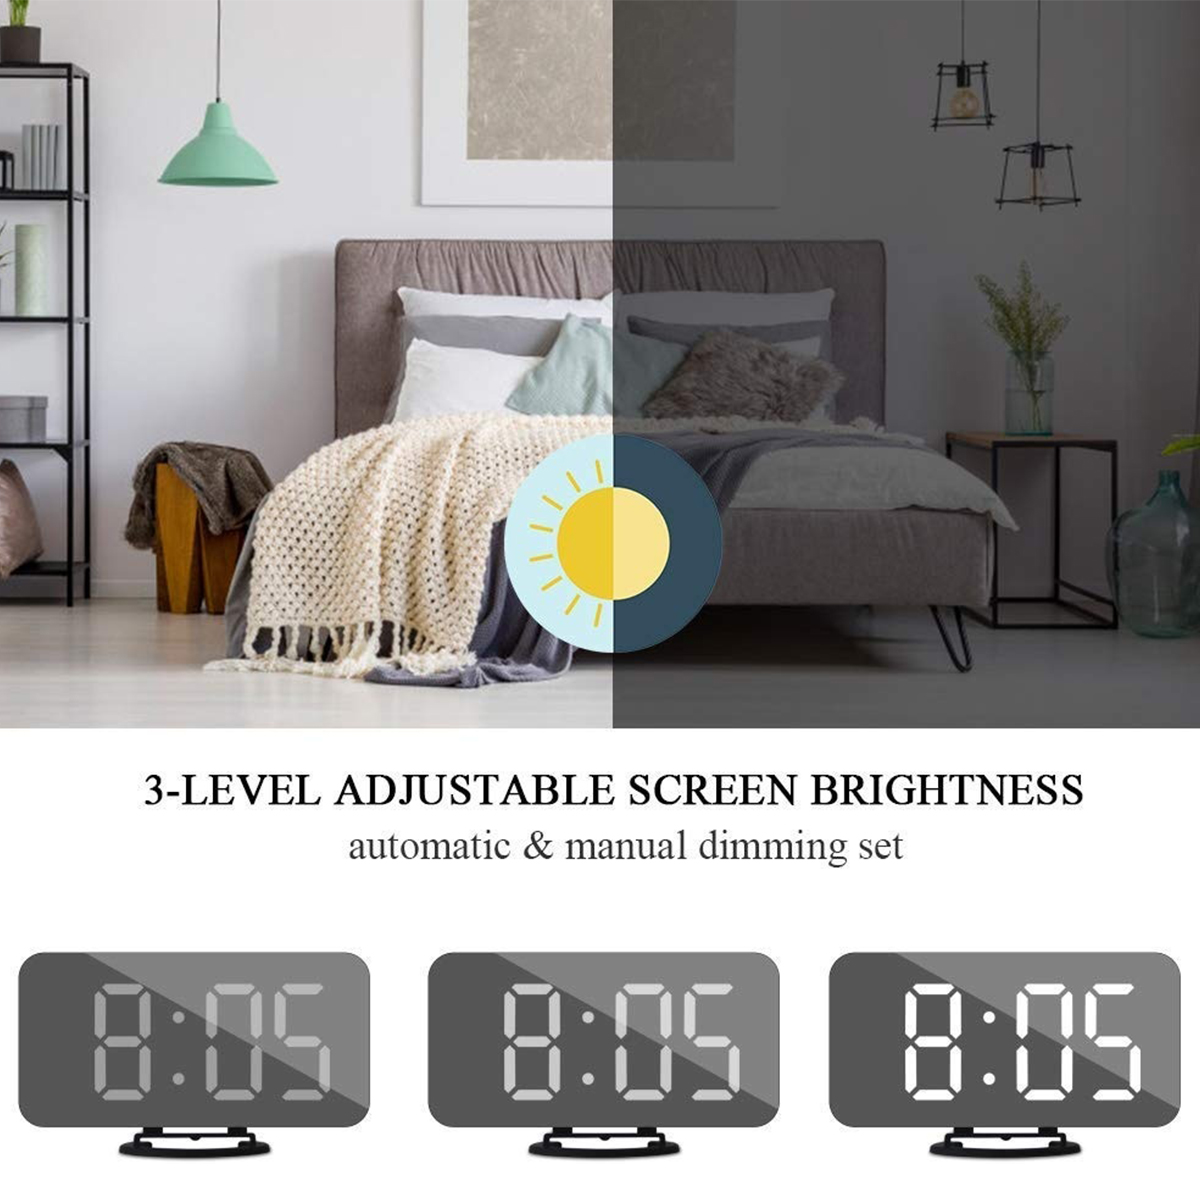 Digital-LED-Mirror-Large-Display-Alarm-Clock-Snooze-Function-Dual-USB-Charger-1623626-3